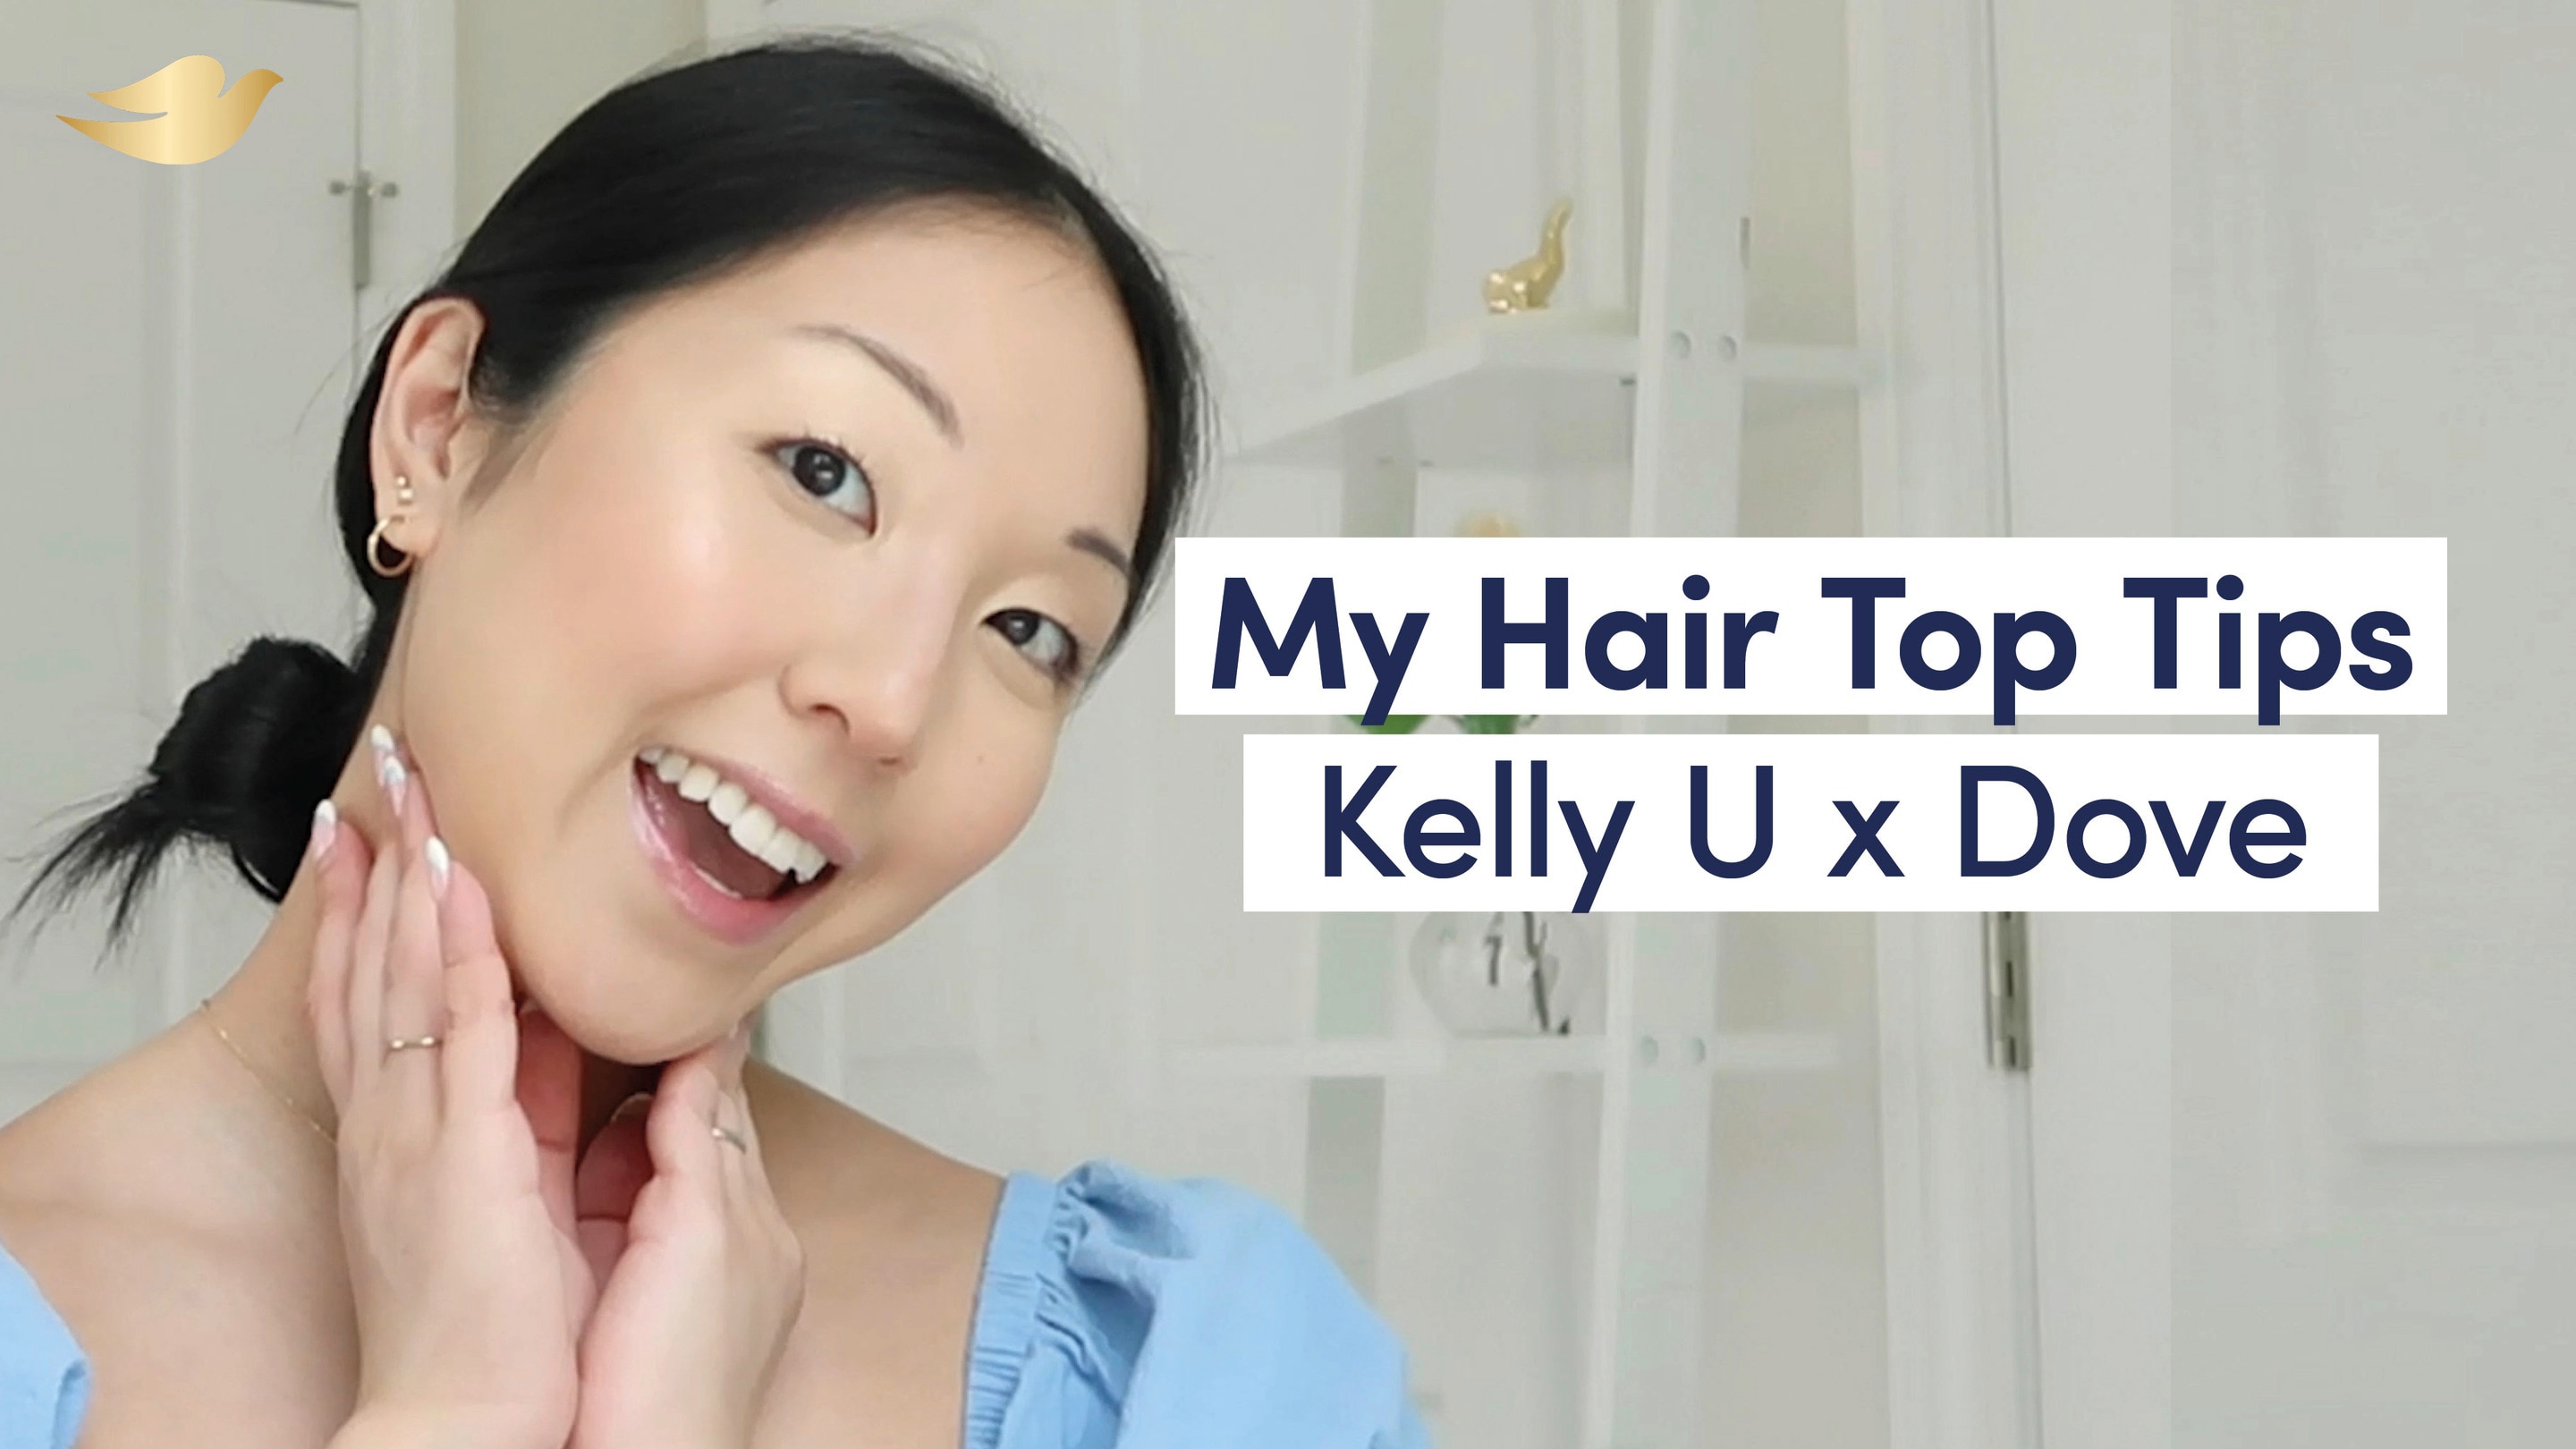 Video of Dove Partner, Kelly U answering your questions, including her best advice on how she cares for split ends, hair breakage and damaged hair.